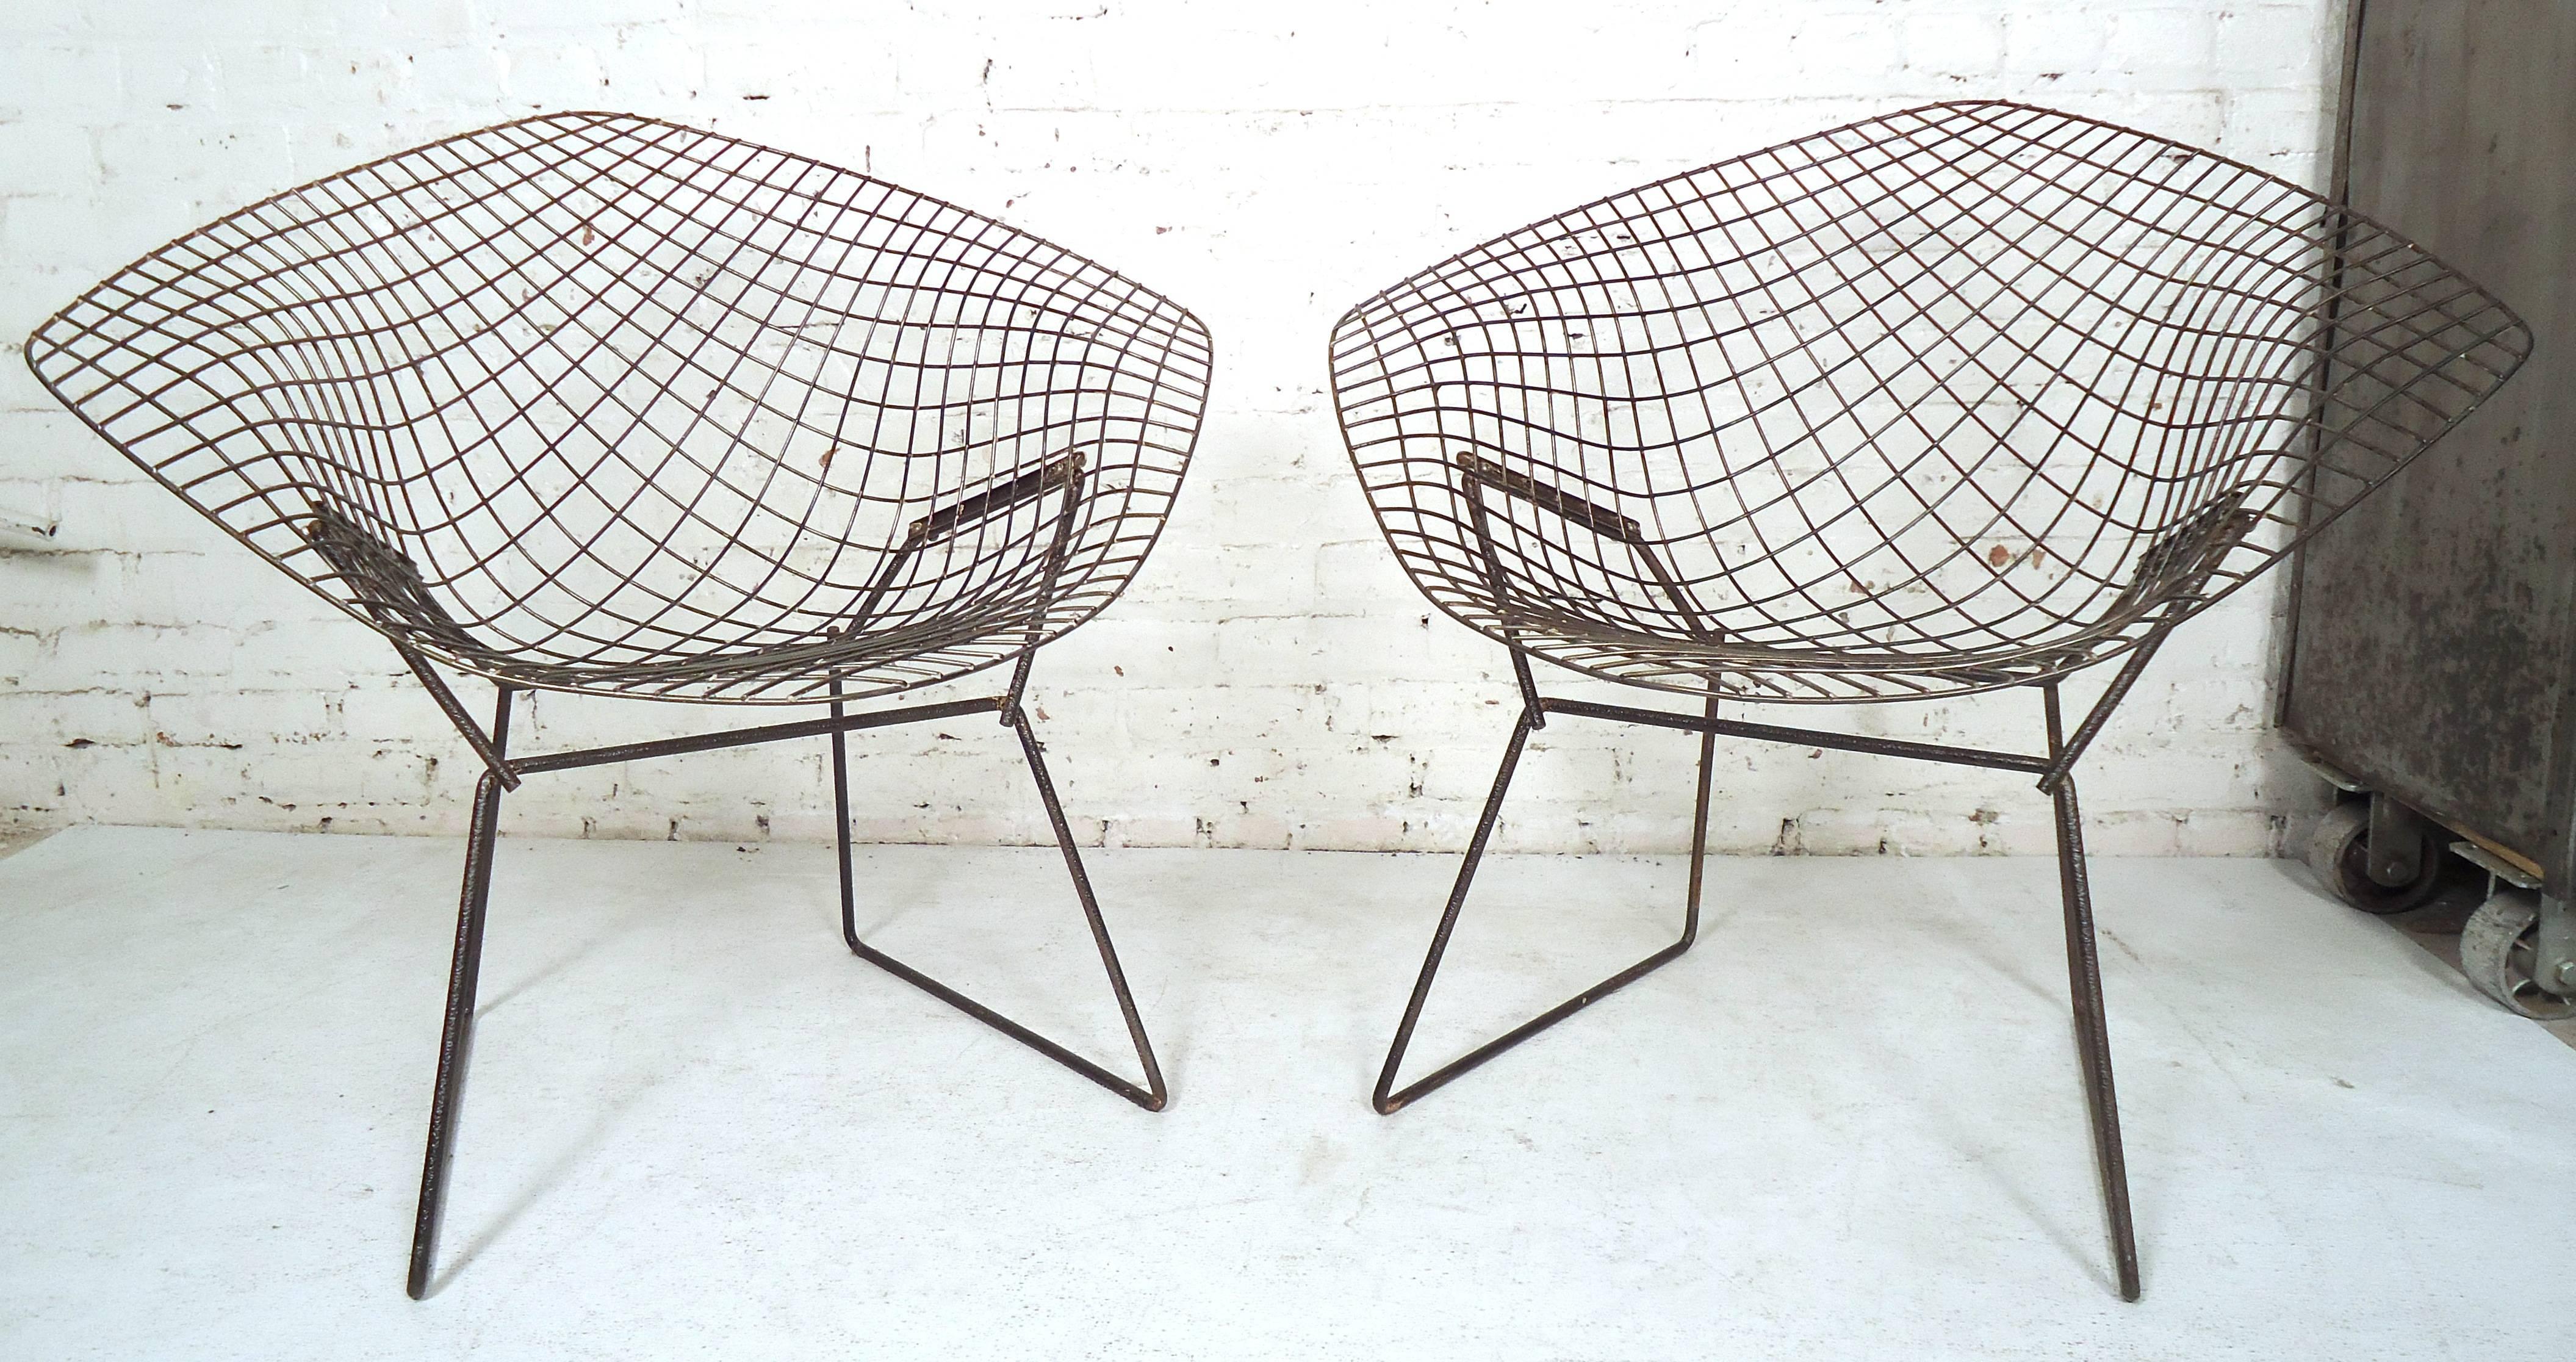 Pair of Mid-Century Modern wire 'Diamond' chairs designed by Harry Bertoia manufactured by Knoll. 

Please confirm item location (NY or NJ).